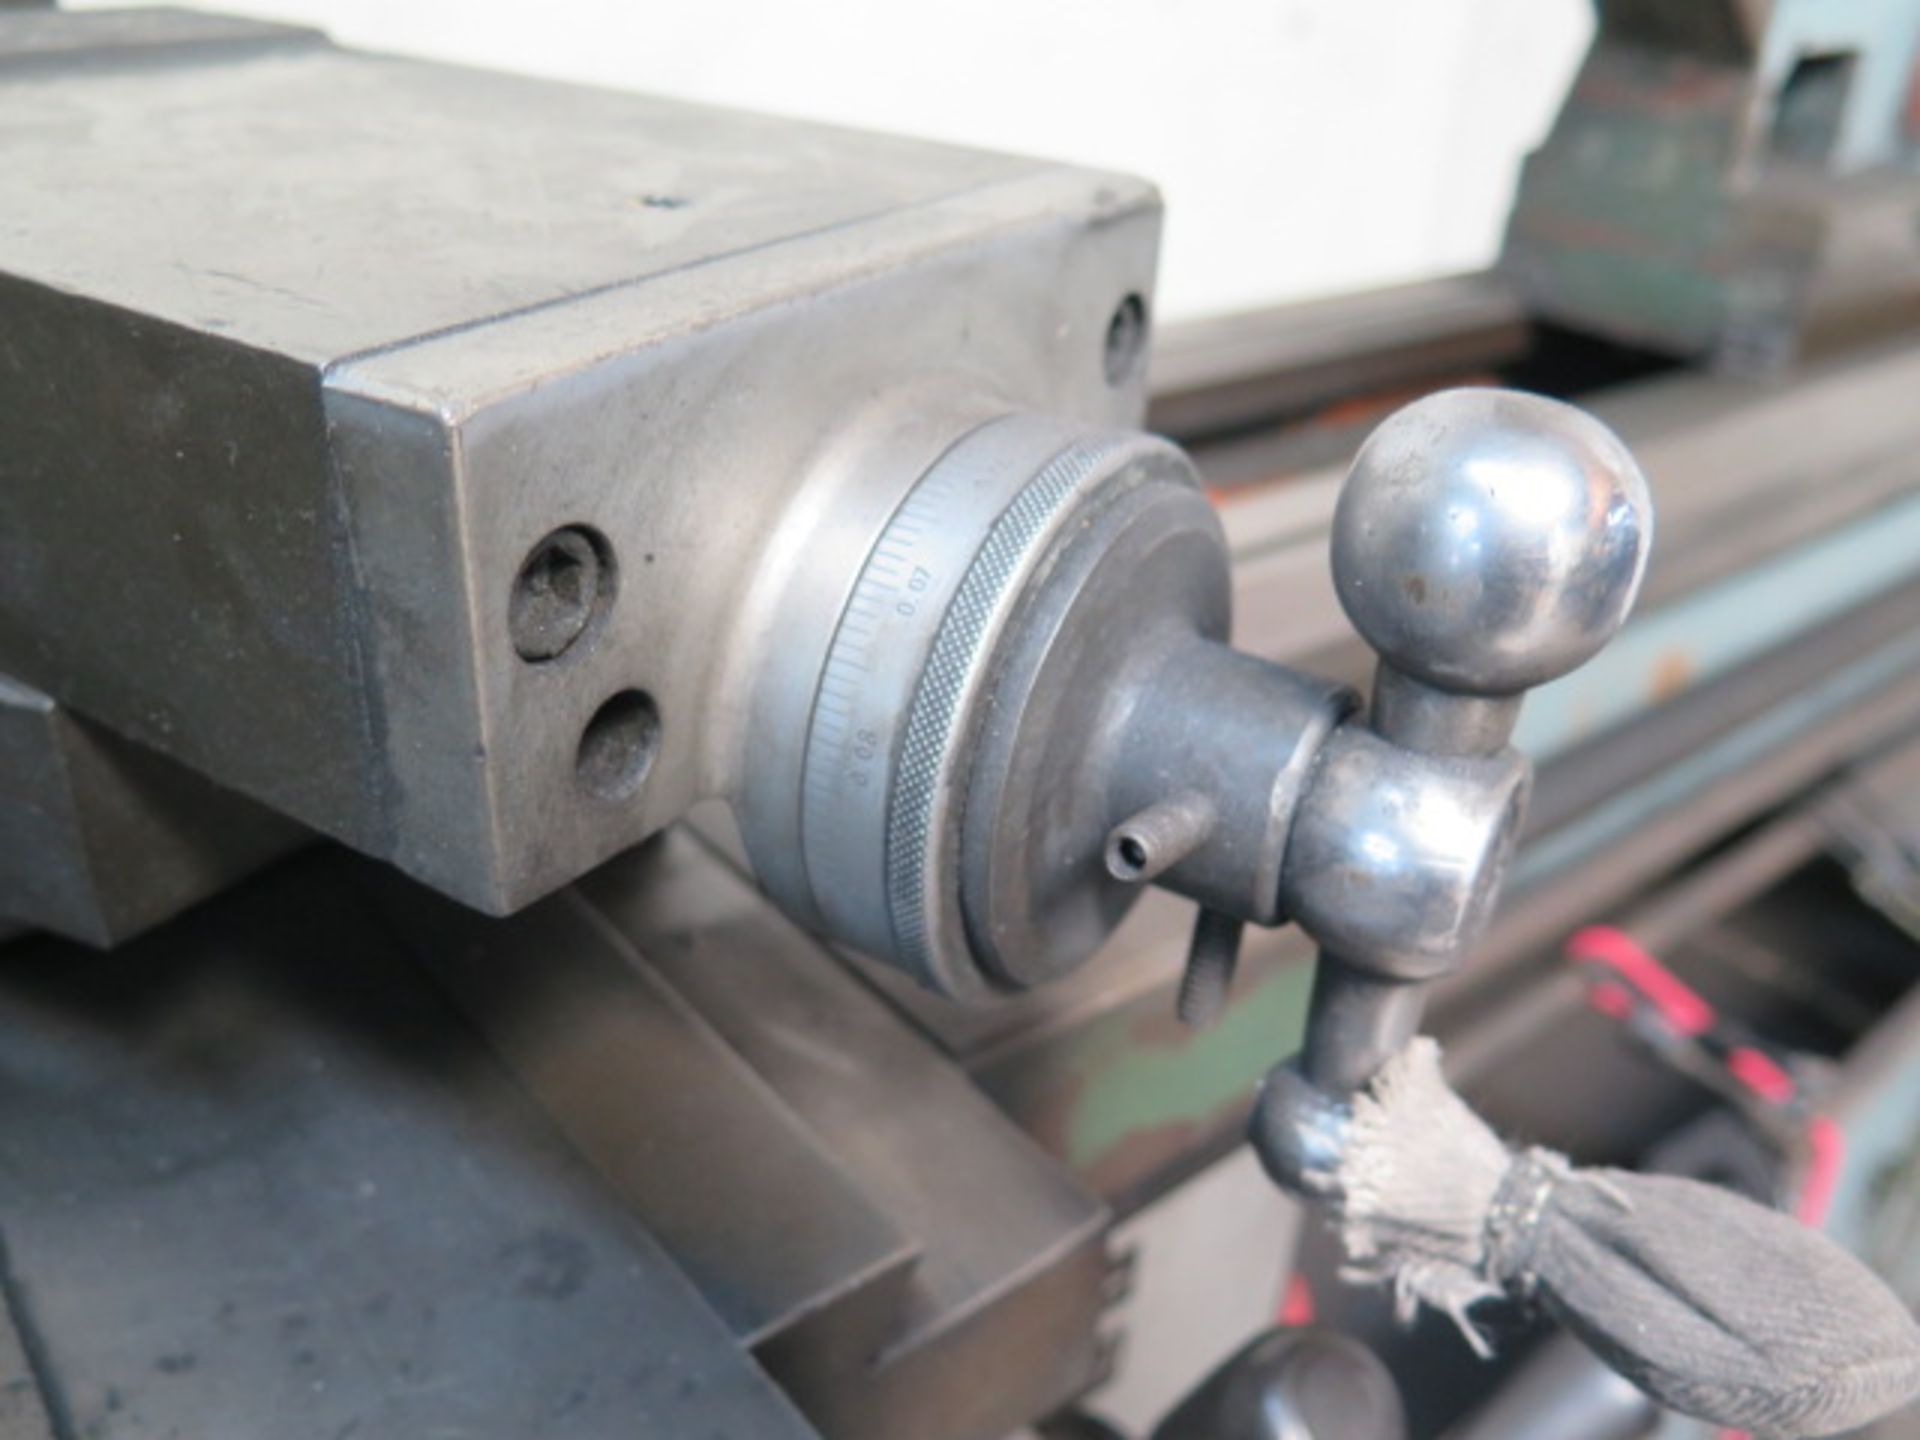 Japan Machinery Corp NL-20X60 20” x 60” Gap Bed Lathe w/Inch/mm Threading, Tailstock, SOLD AS IS - Image 10 of 20